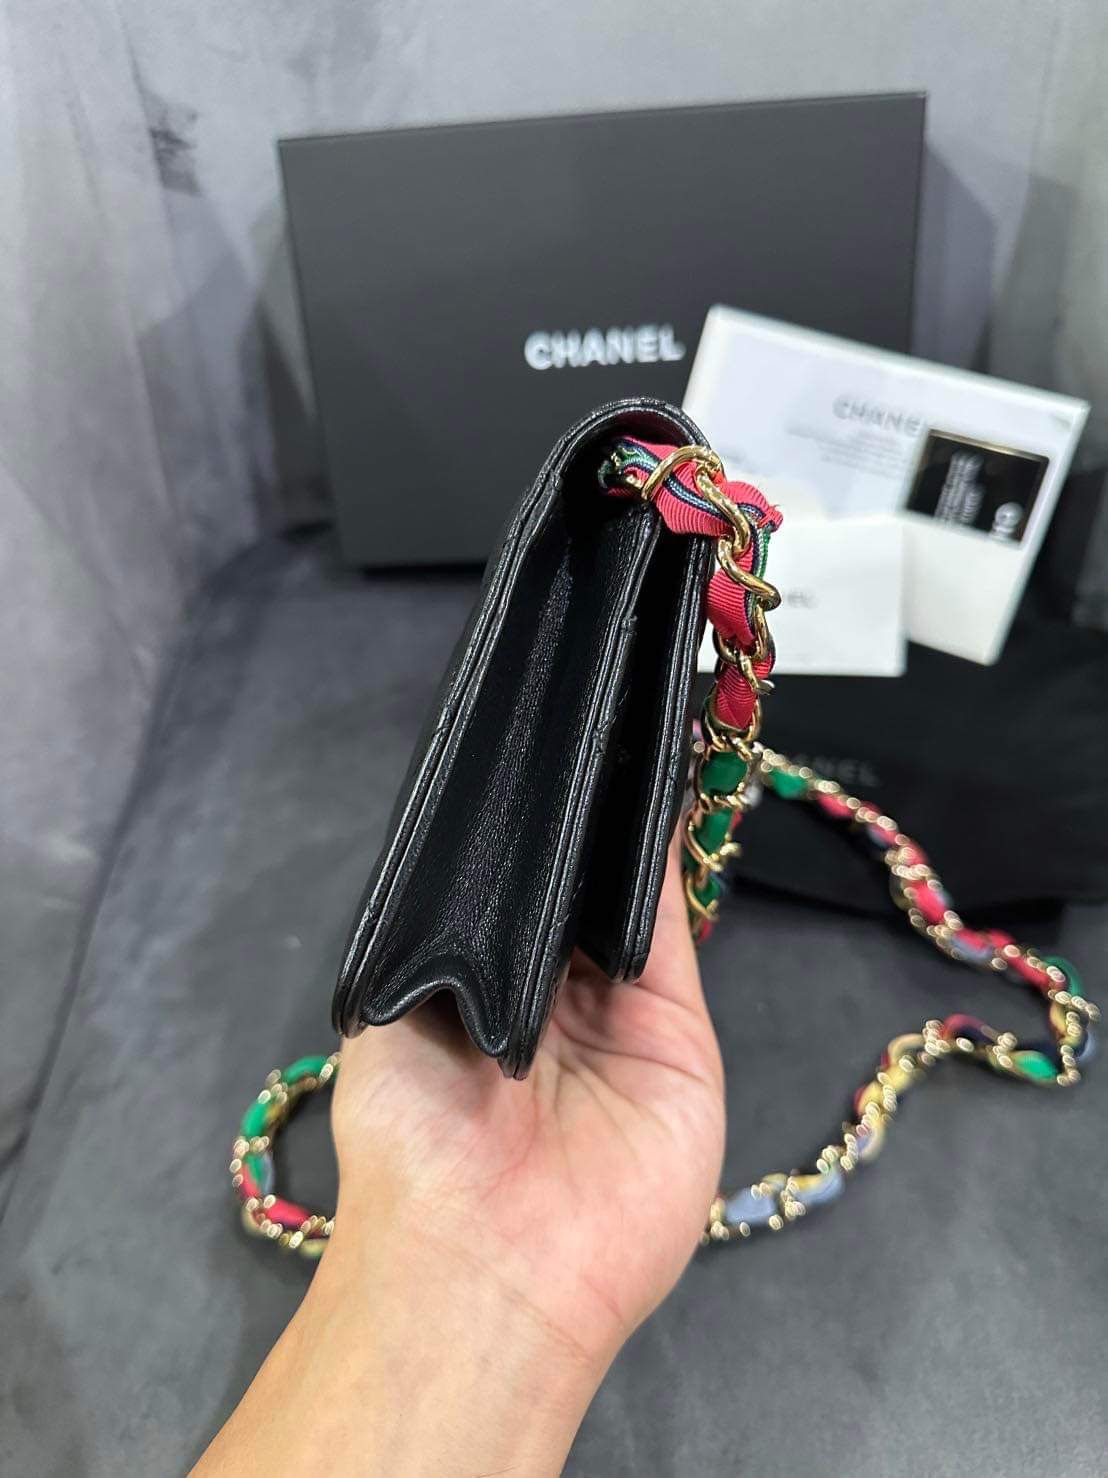 Chanel WOC: How to Shorten the Strap 